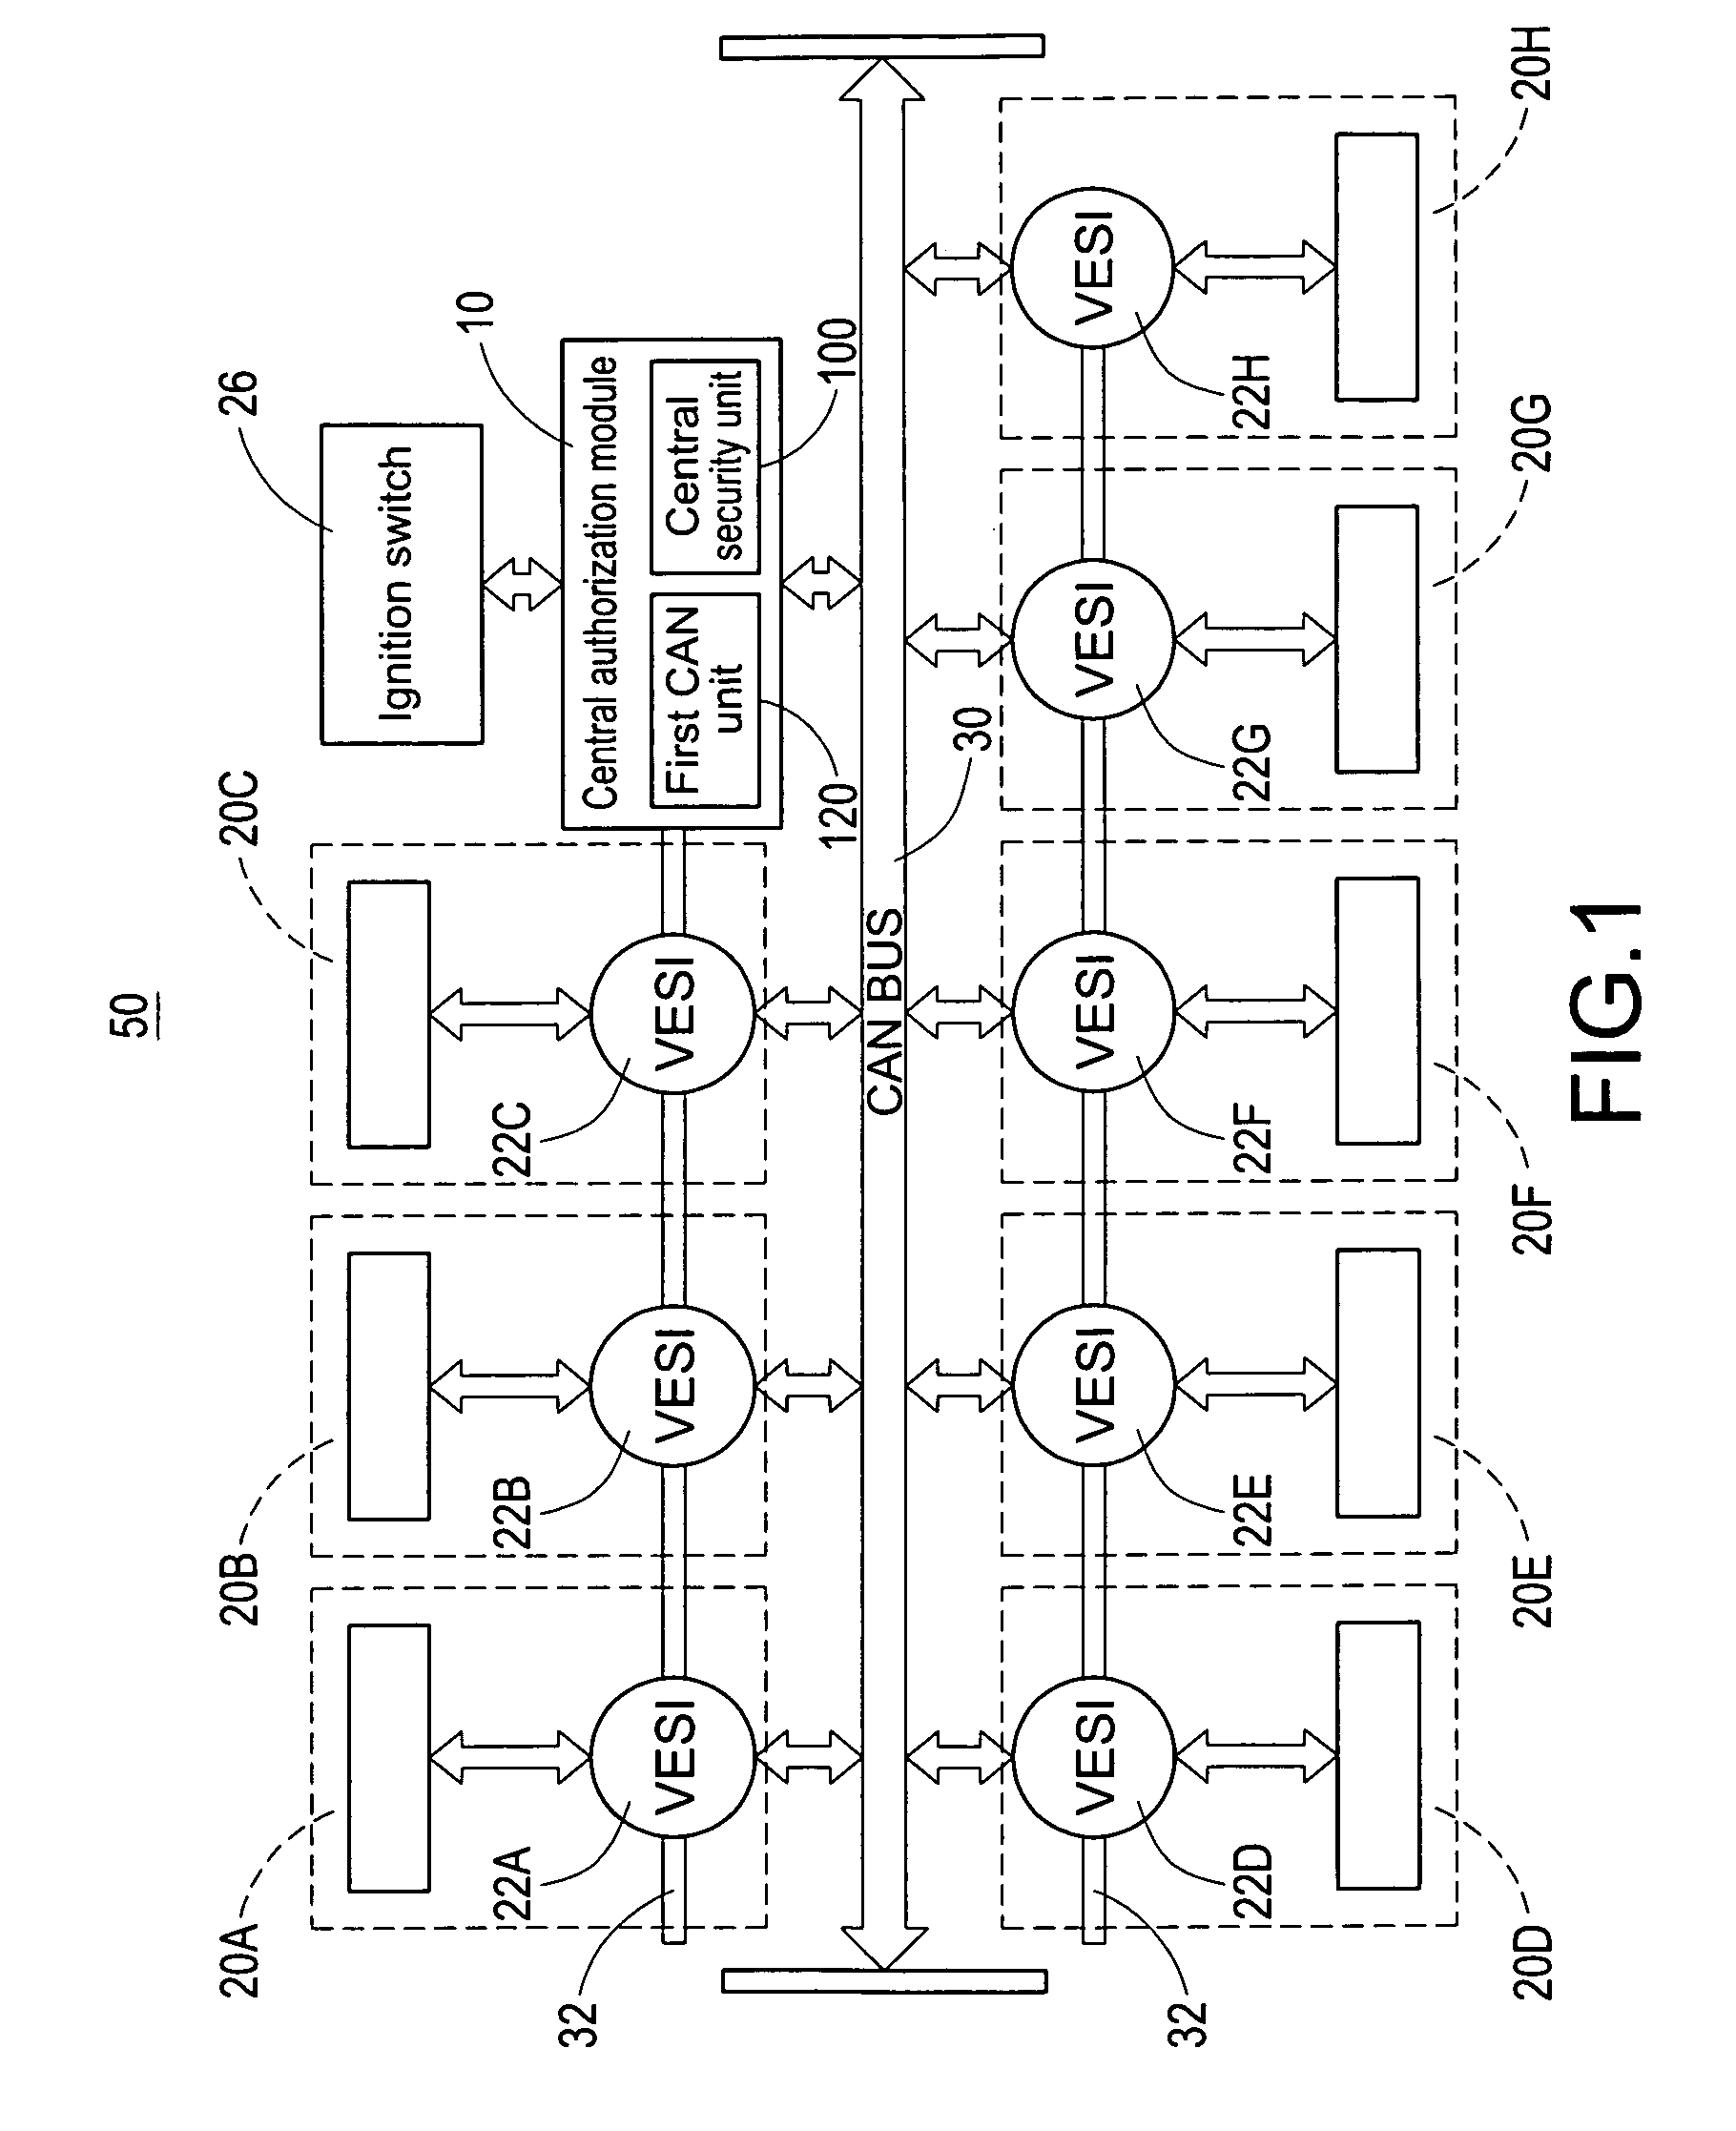 Electronic Anti-theft system for vehicle components